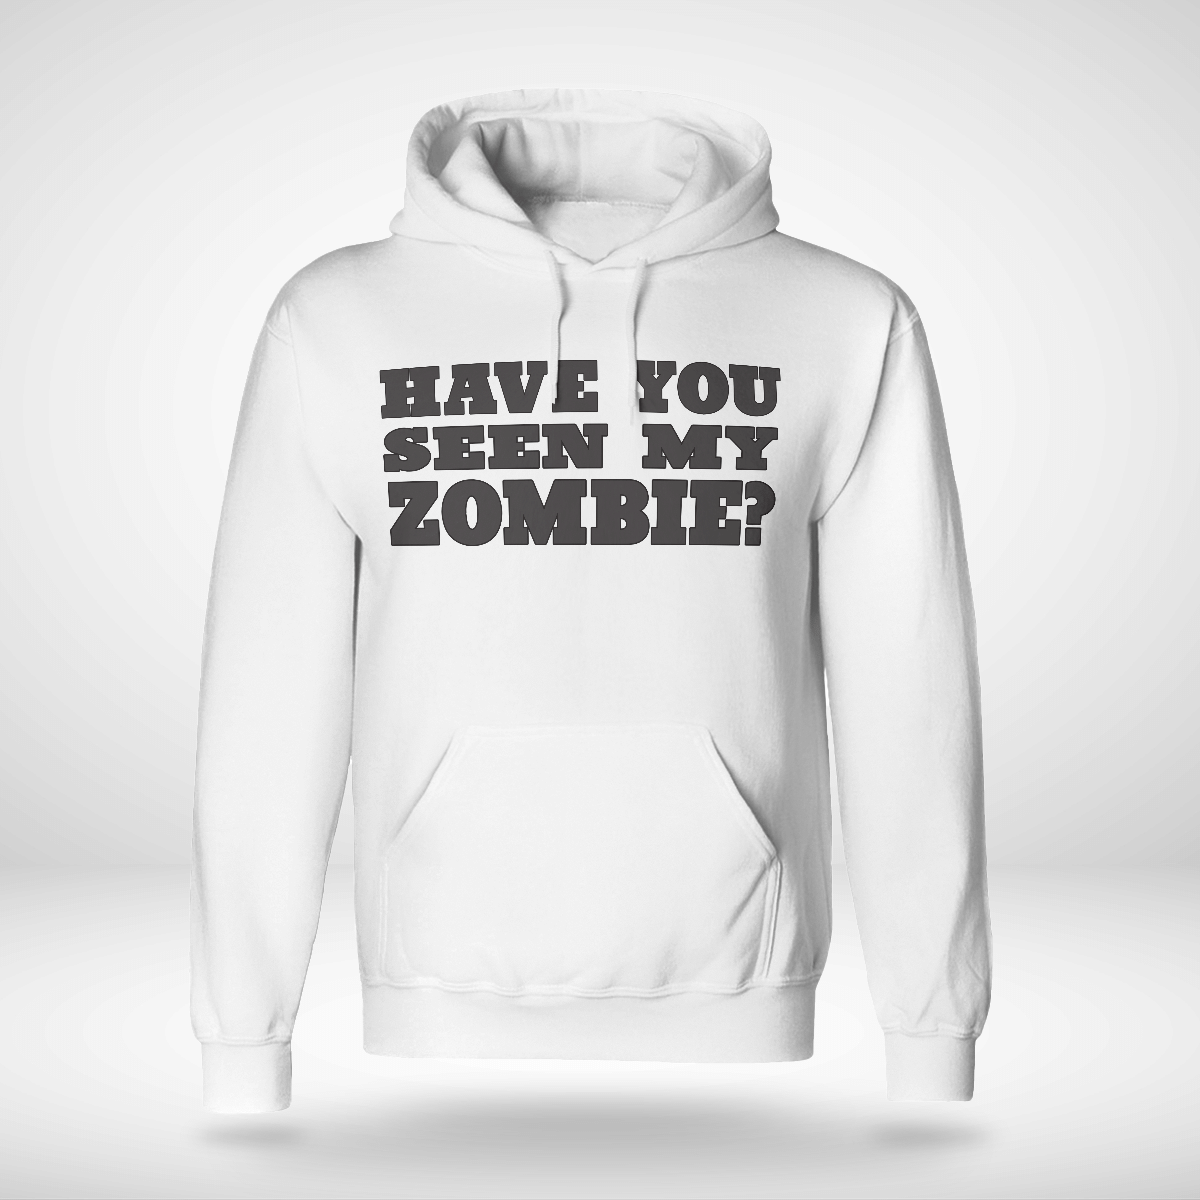 Have You Seen My Zombie Shirt Style: Unisex Hoodie, Color: White